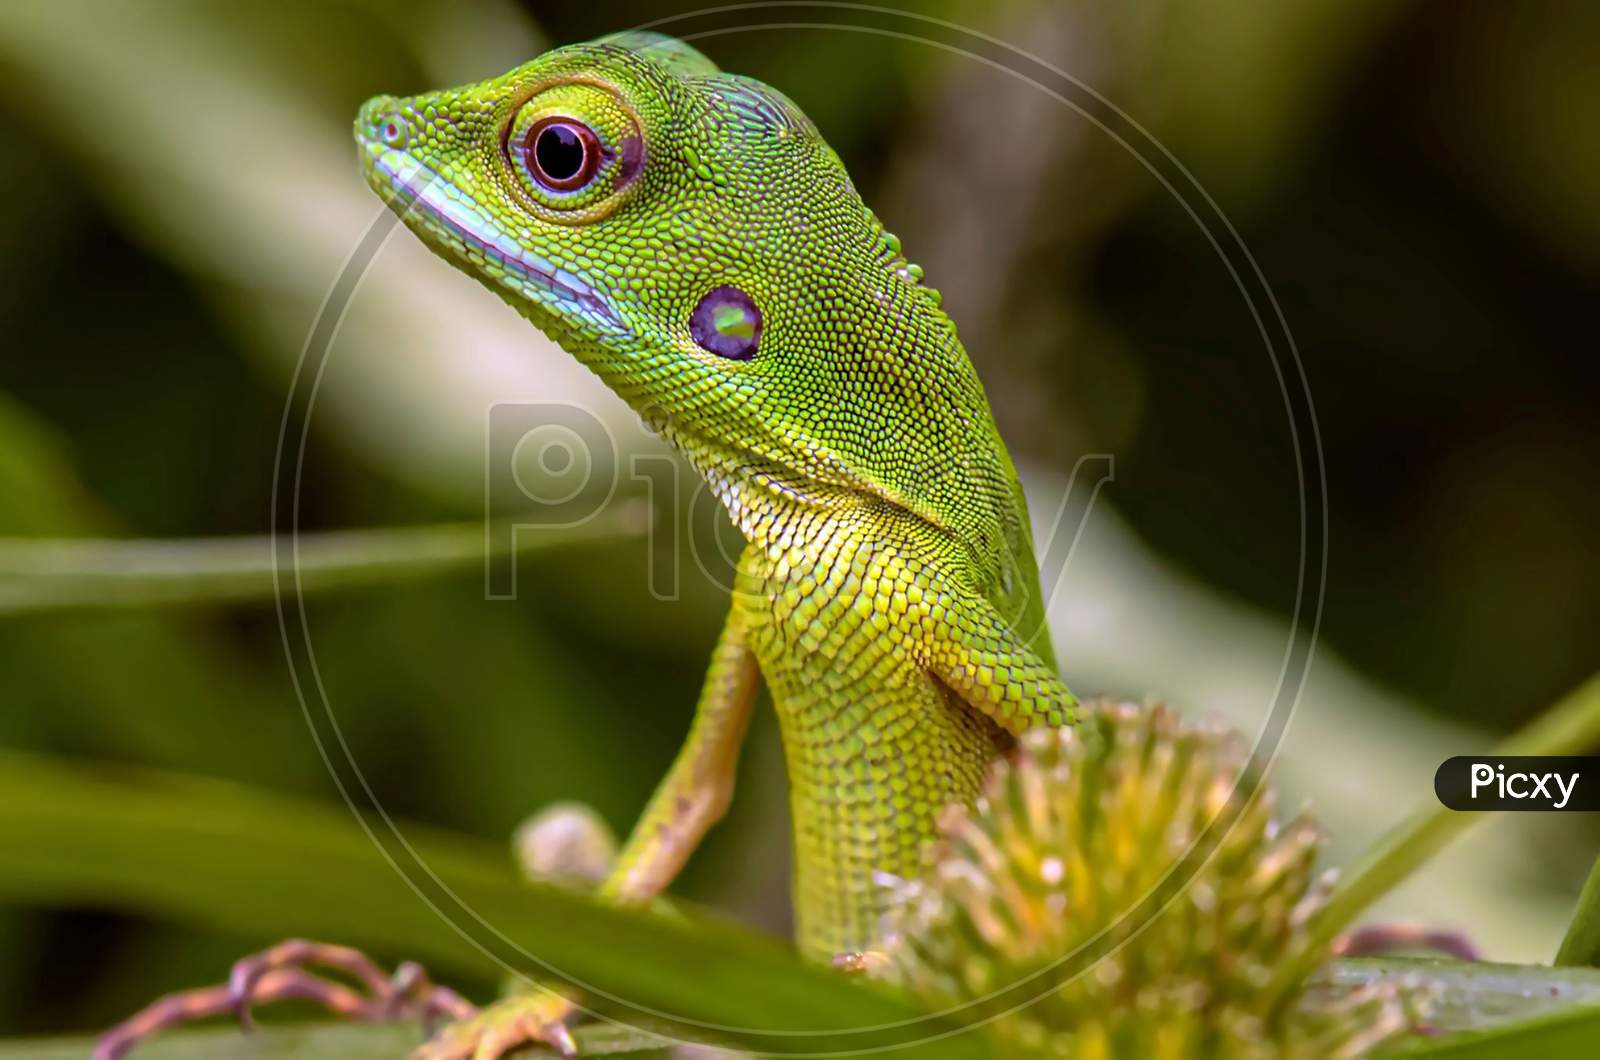 Bronchocela Cristatella, Also Known As The Green Crested Lizard